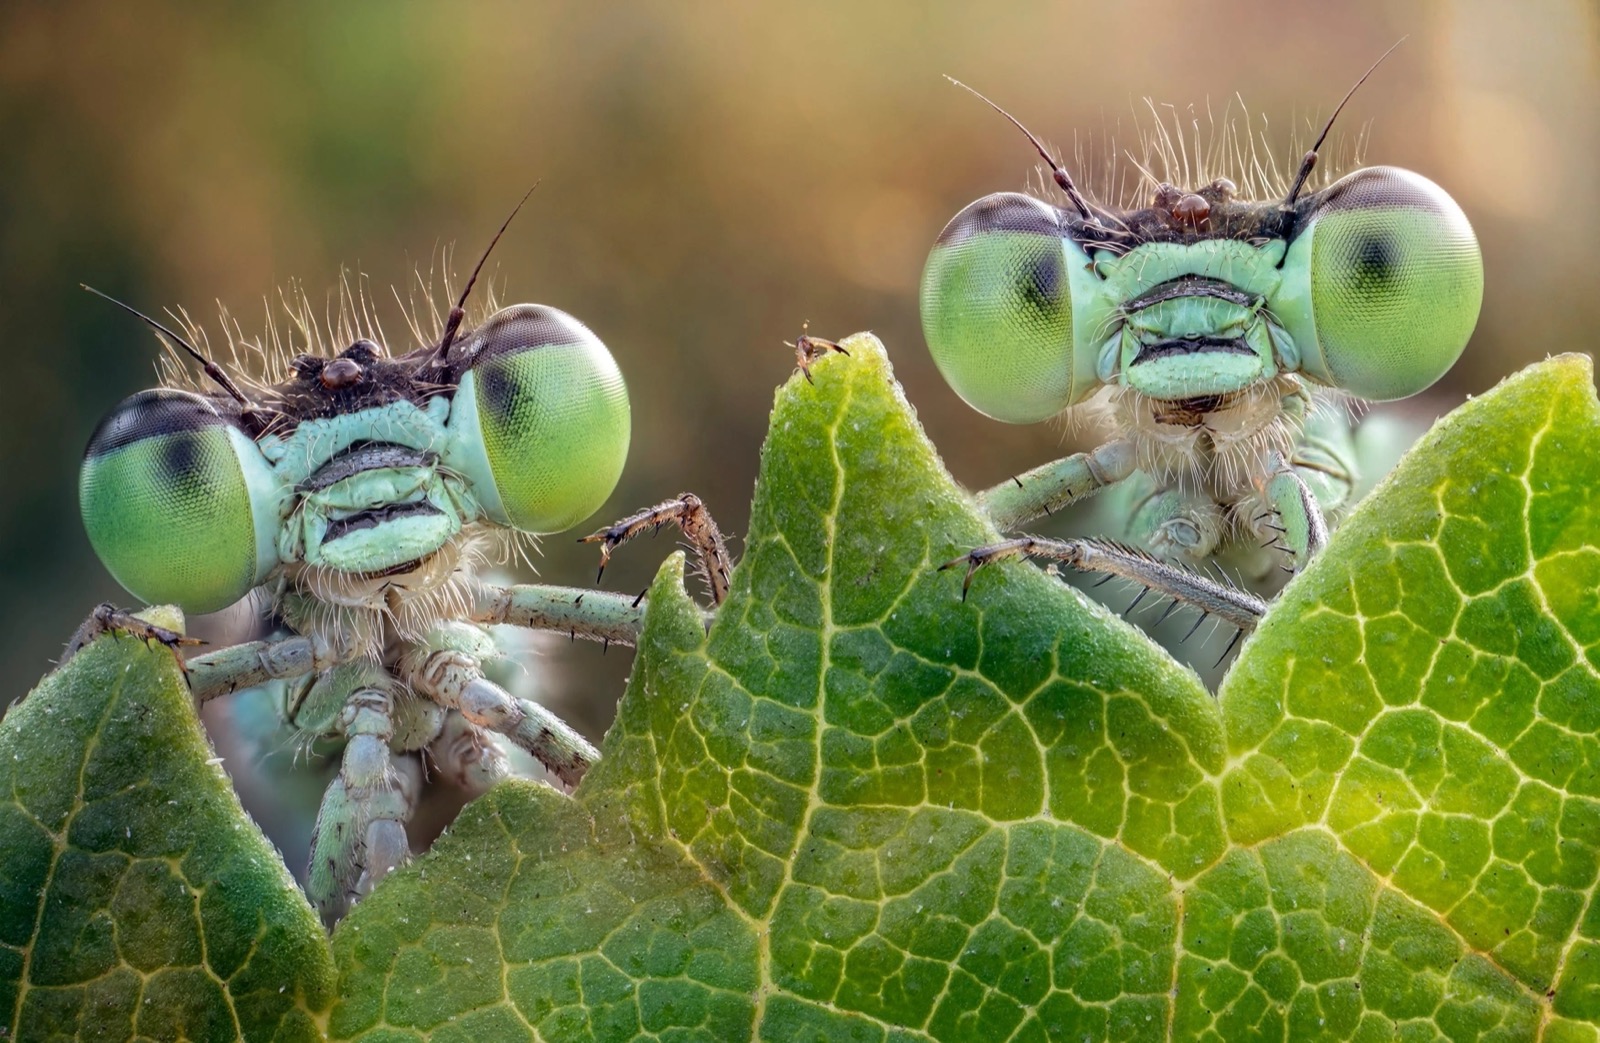 This Animal Quiz Might Not Be Hardest 1 You've Ever Taken, But It Certainly Isn't Easy Damselfly Insects bugs